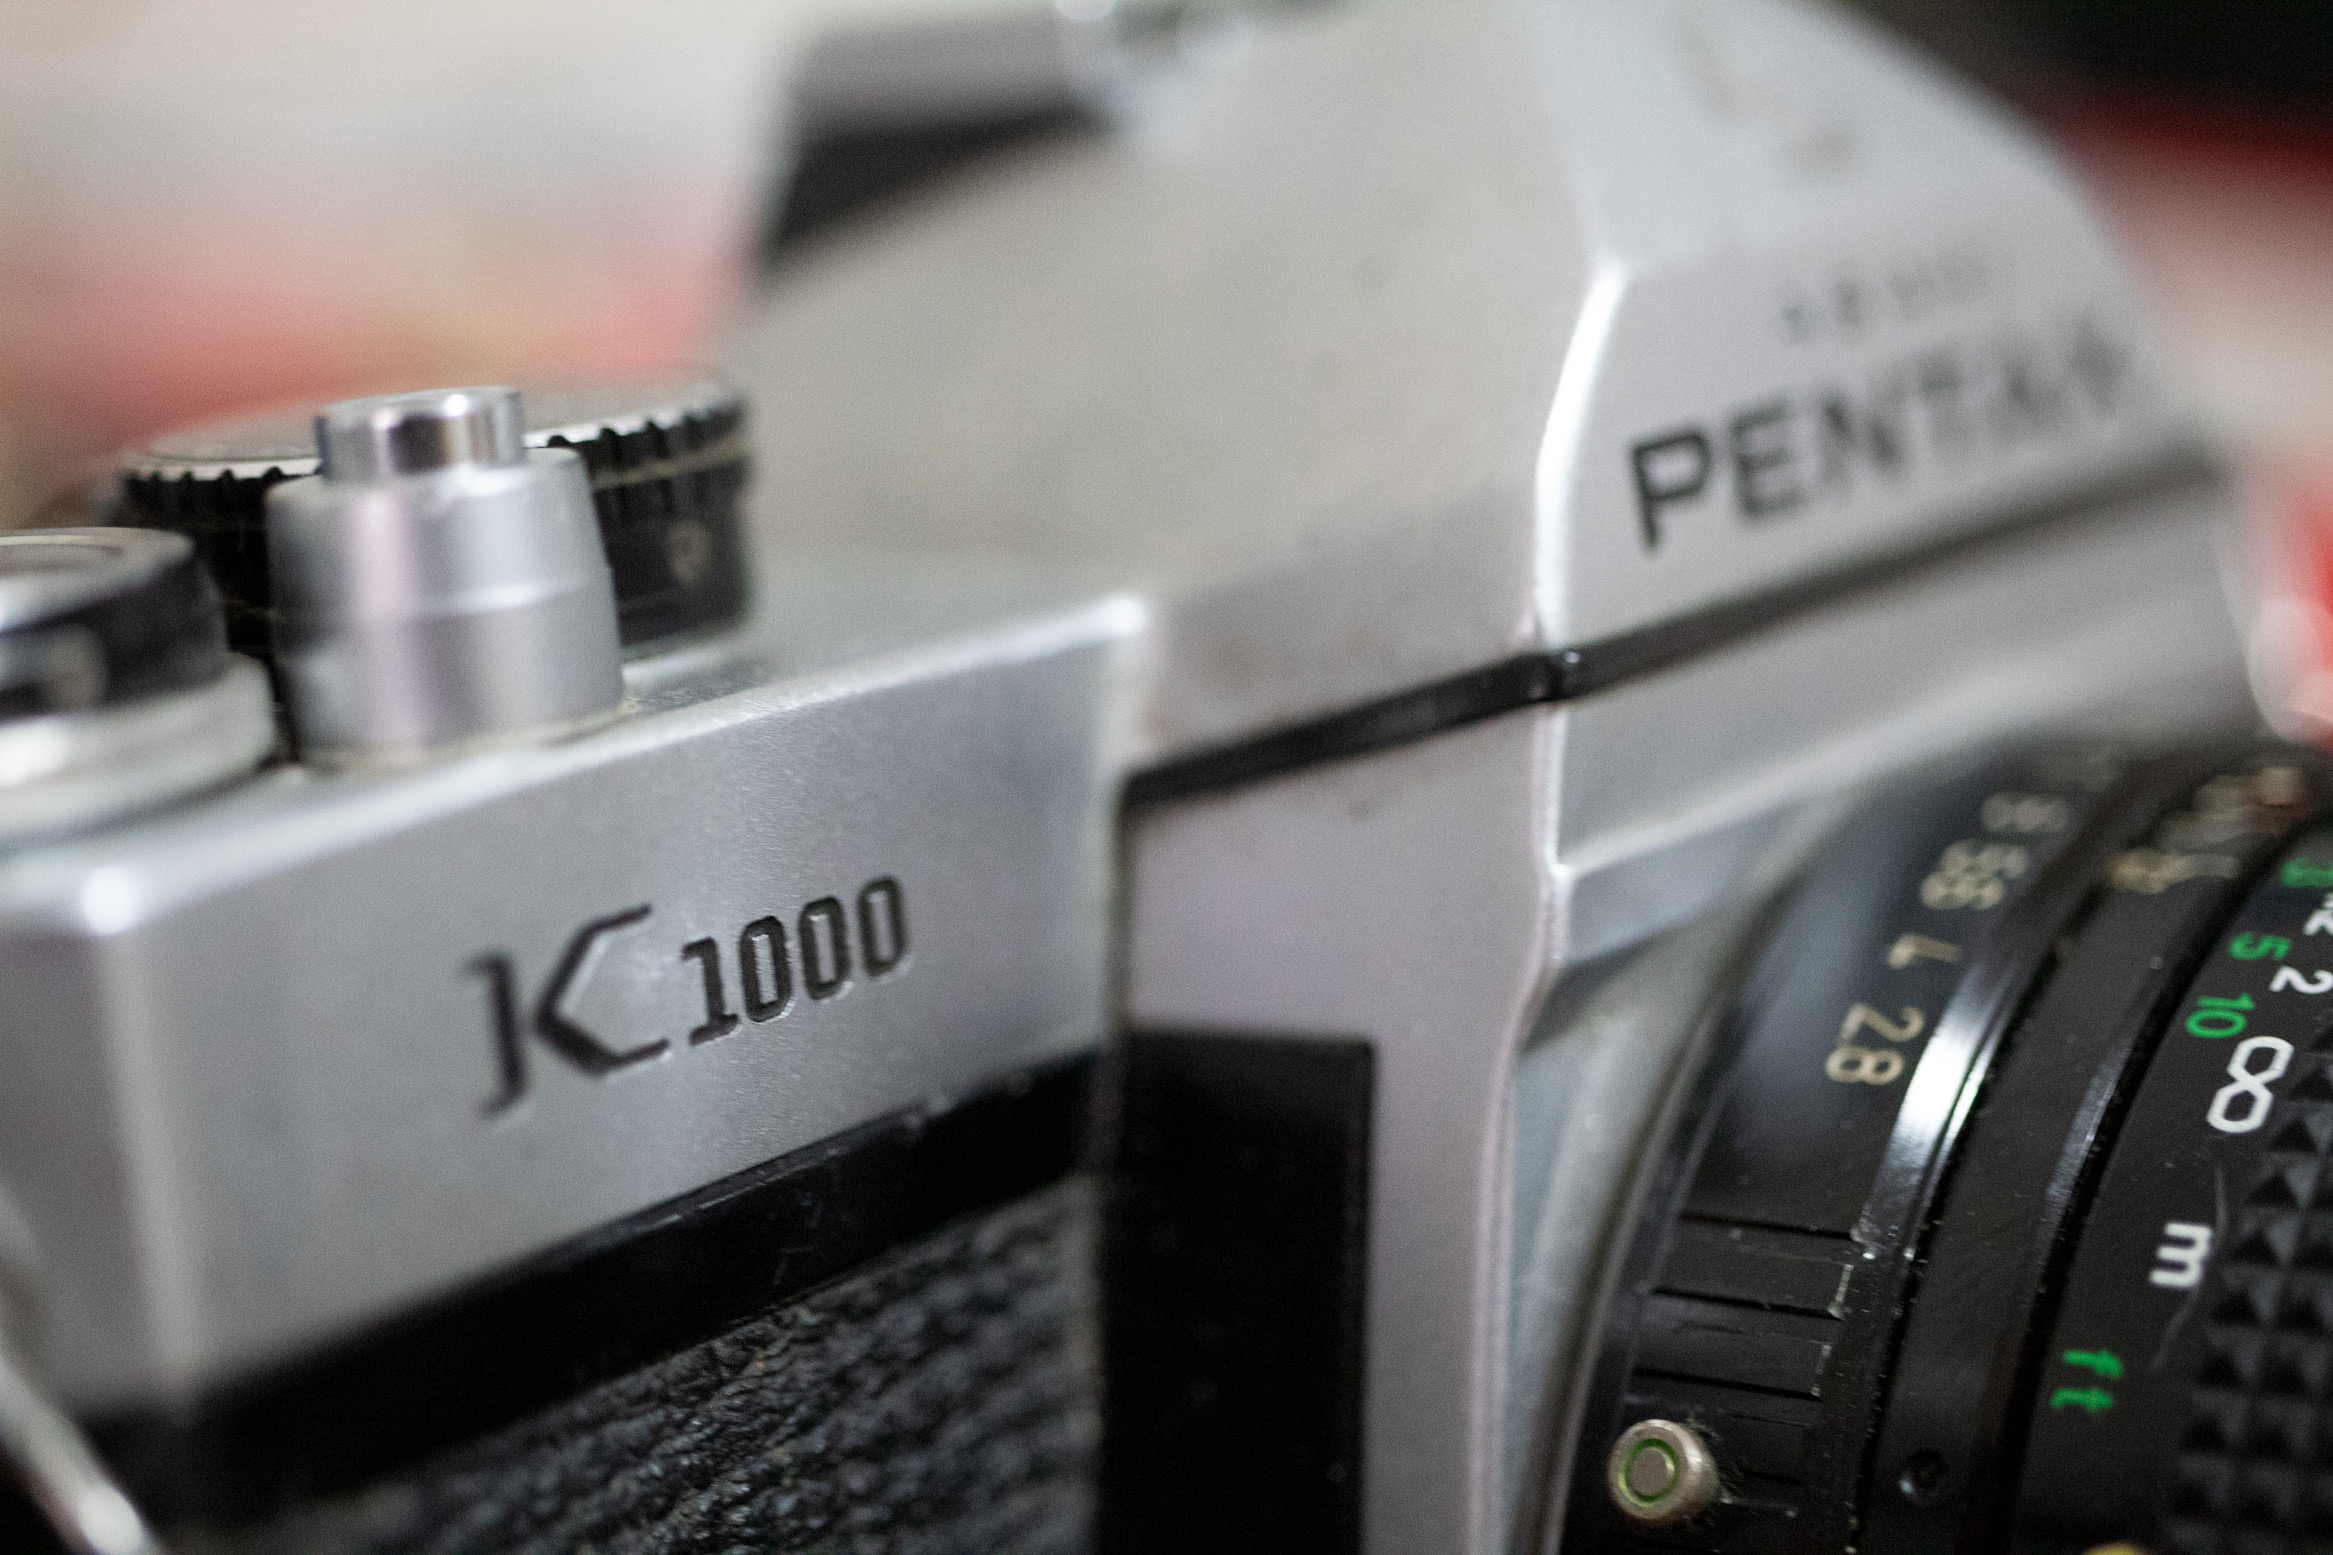 Closeup of a Pentax K1000 with a very narrow depth of field focused on the K1000 logo